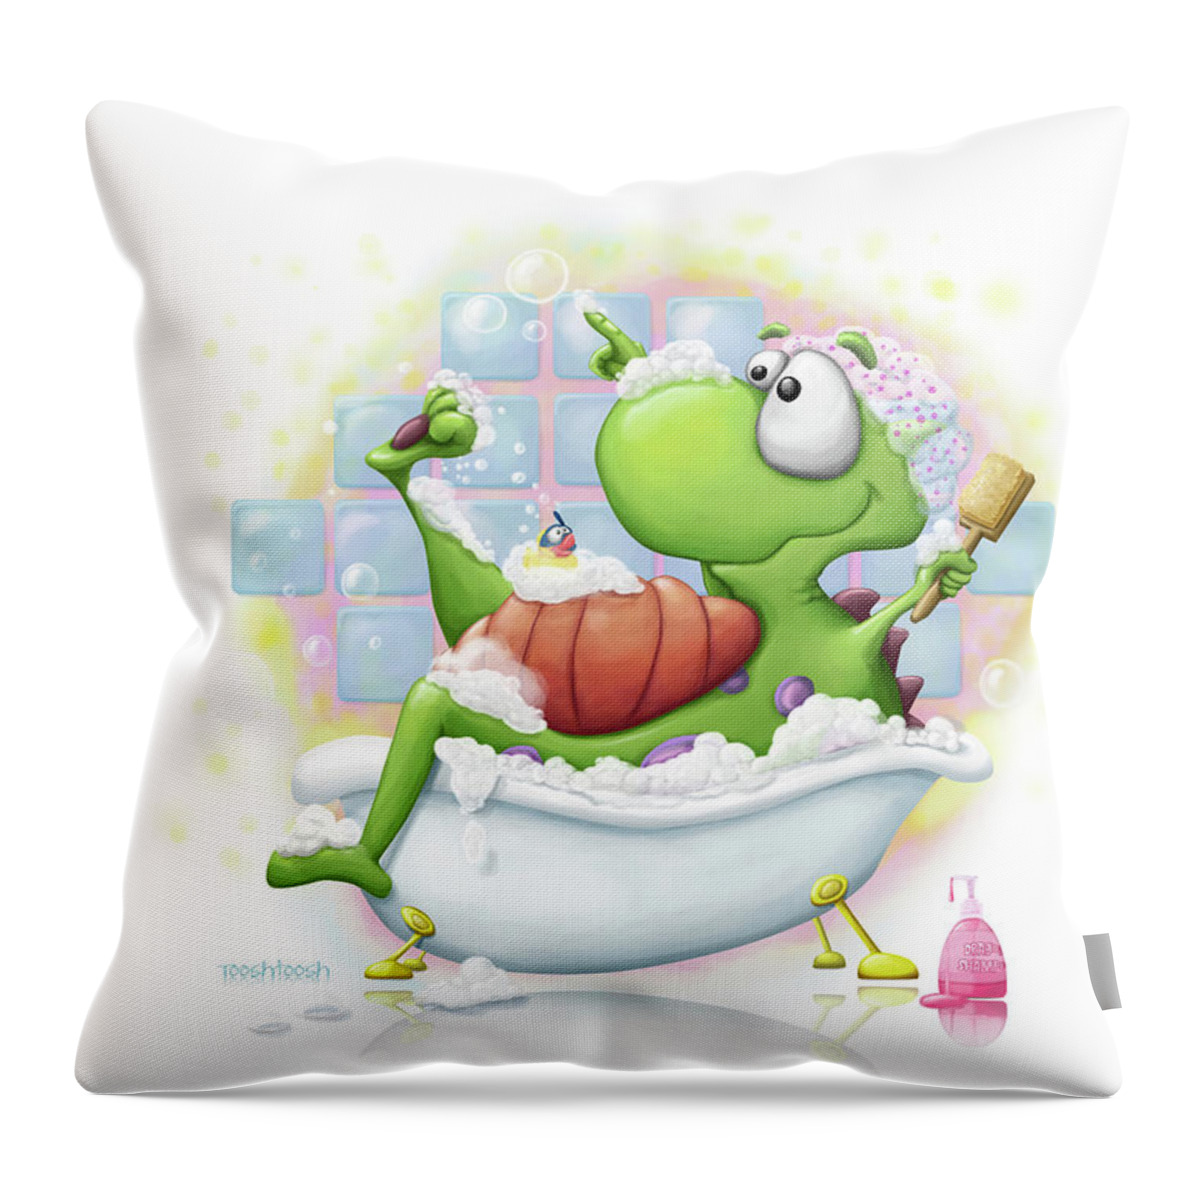 Funny Throw Pillow featuring the digital art Bubble Bath by Toosh Toosh